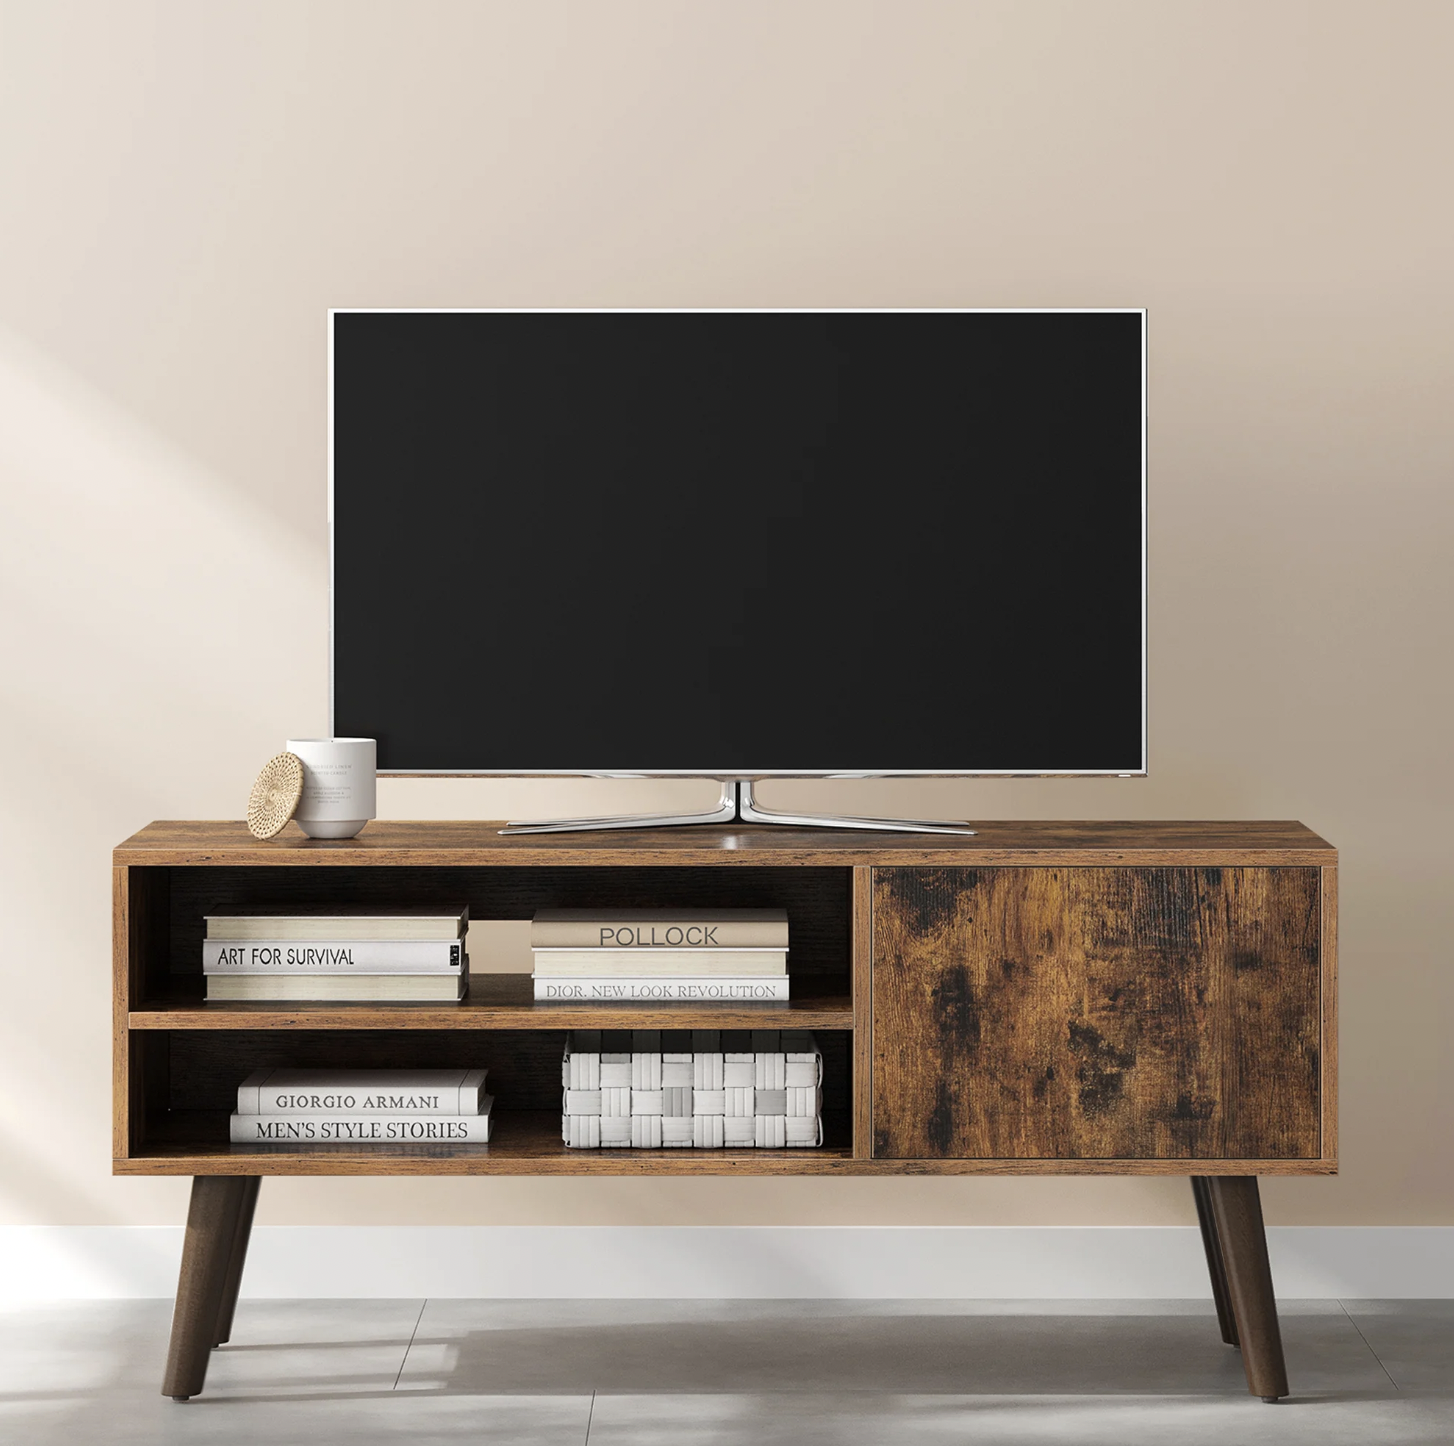 Sudden descent Useless Restless TV Stands for Small Spaces in 2022 Bringing Big Entertainment